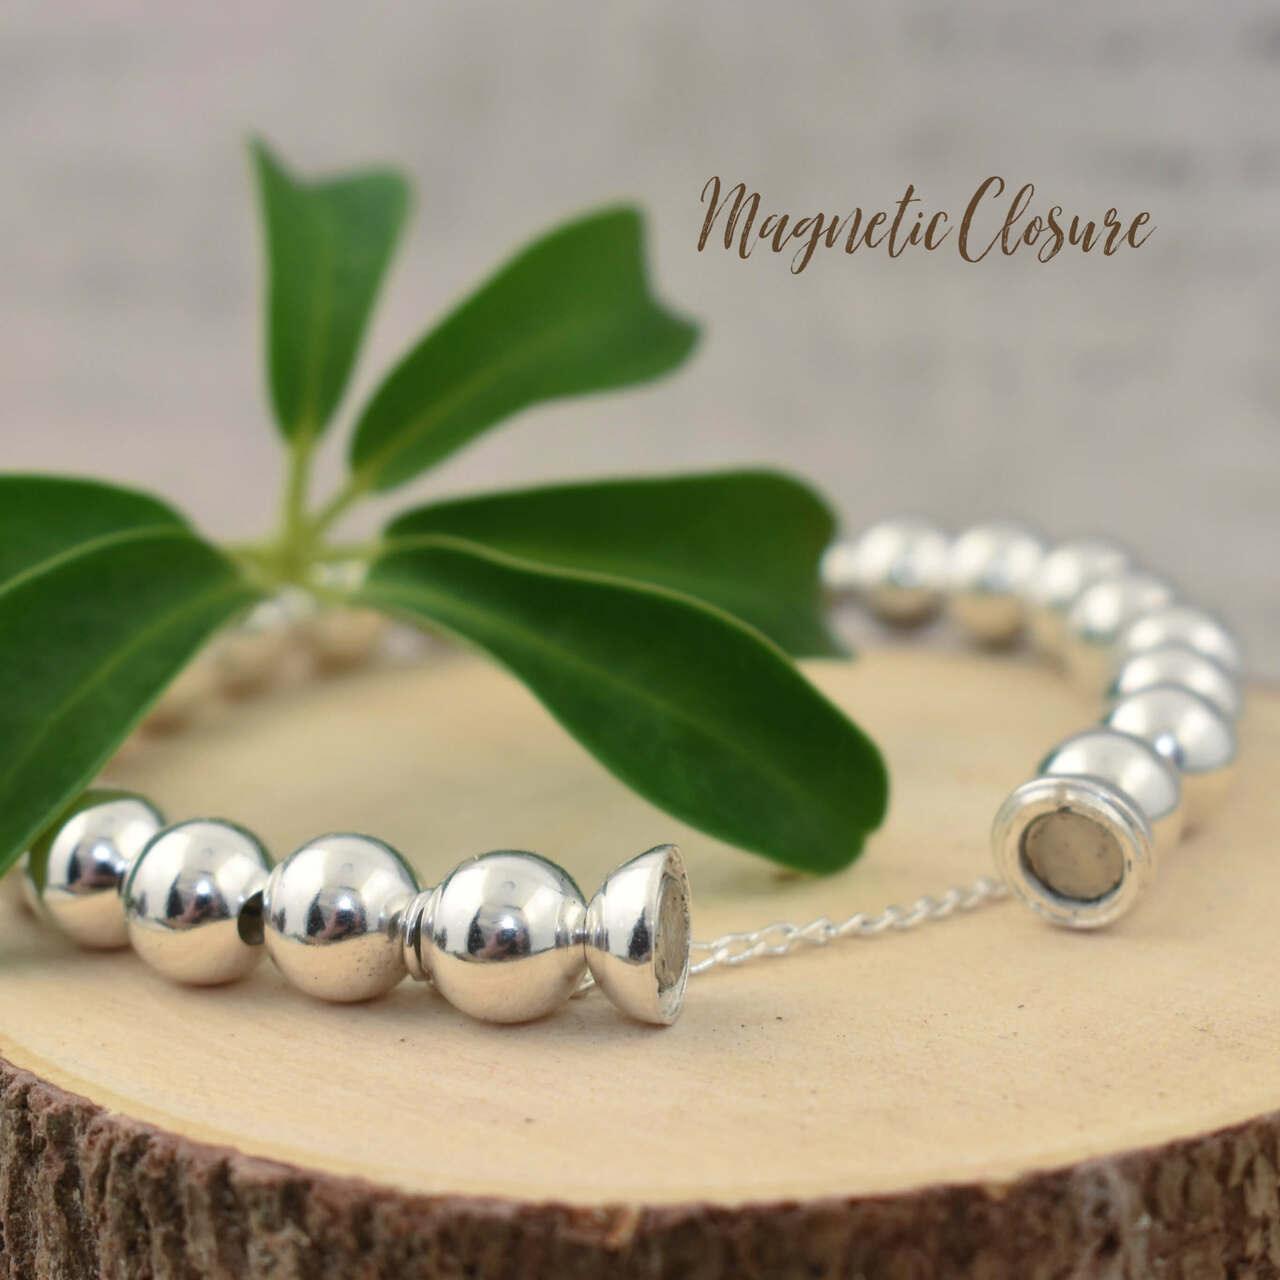 Handcrafted sterling silver bead bracelet with magnetic closure